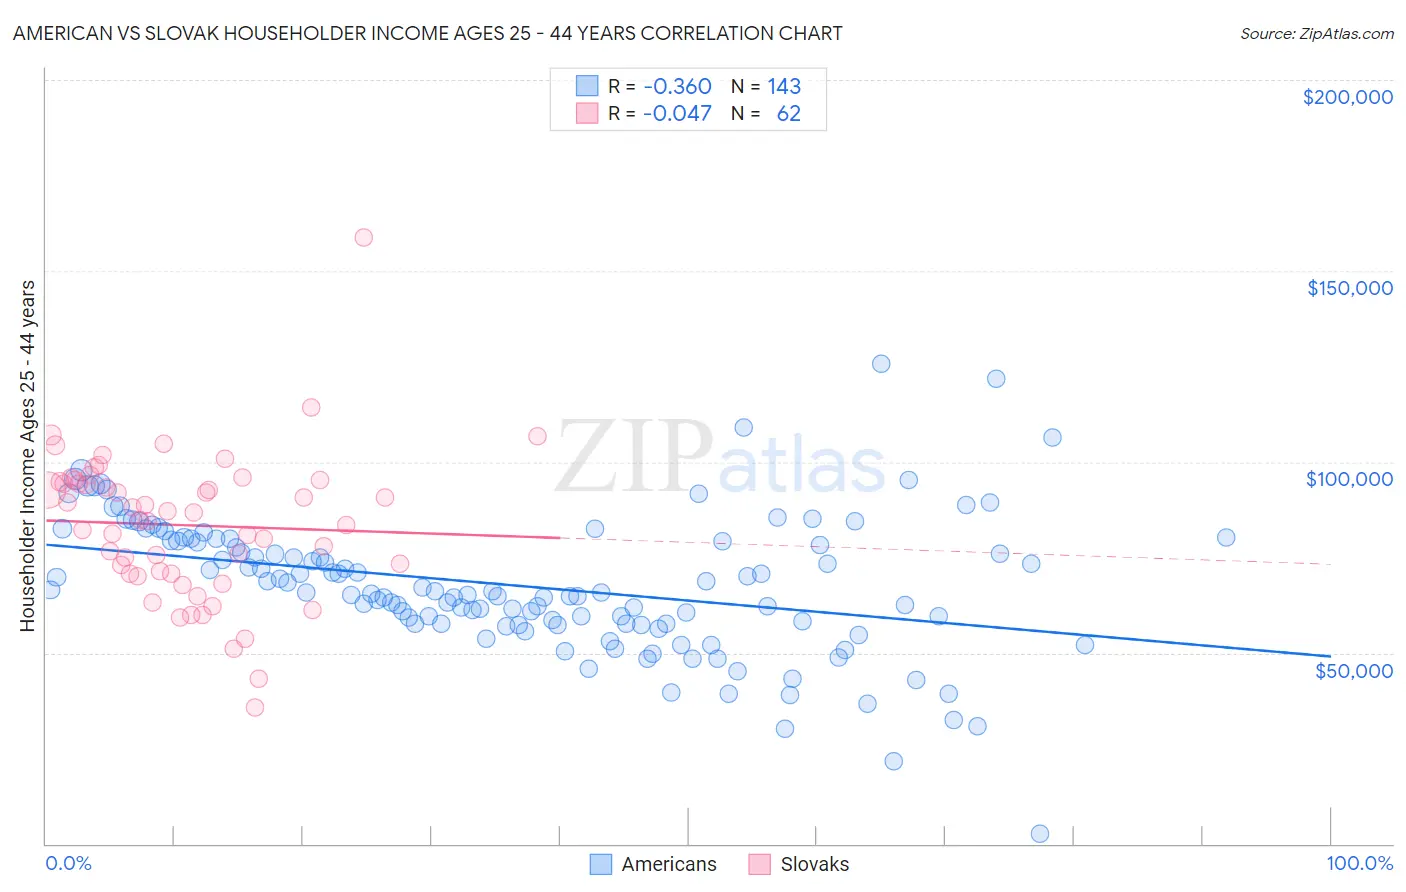 American vs Slovak Householder Income Ages 25 - 44 years